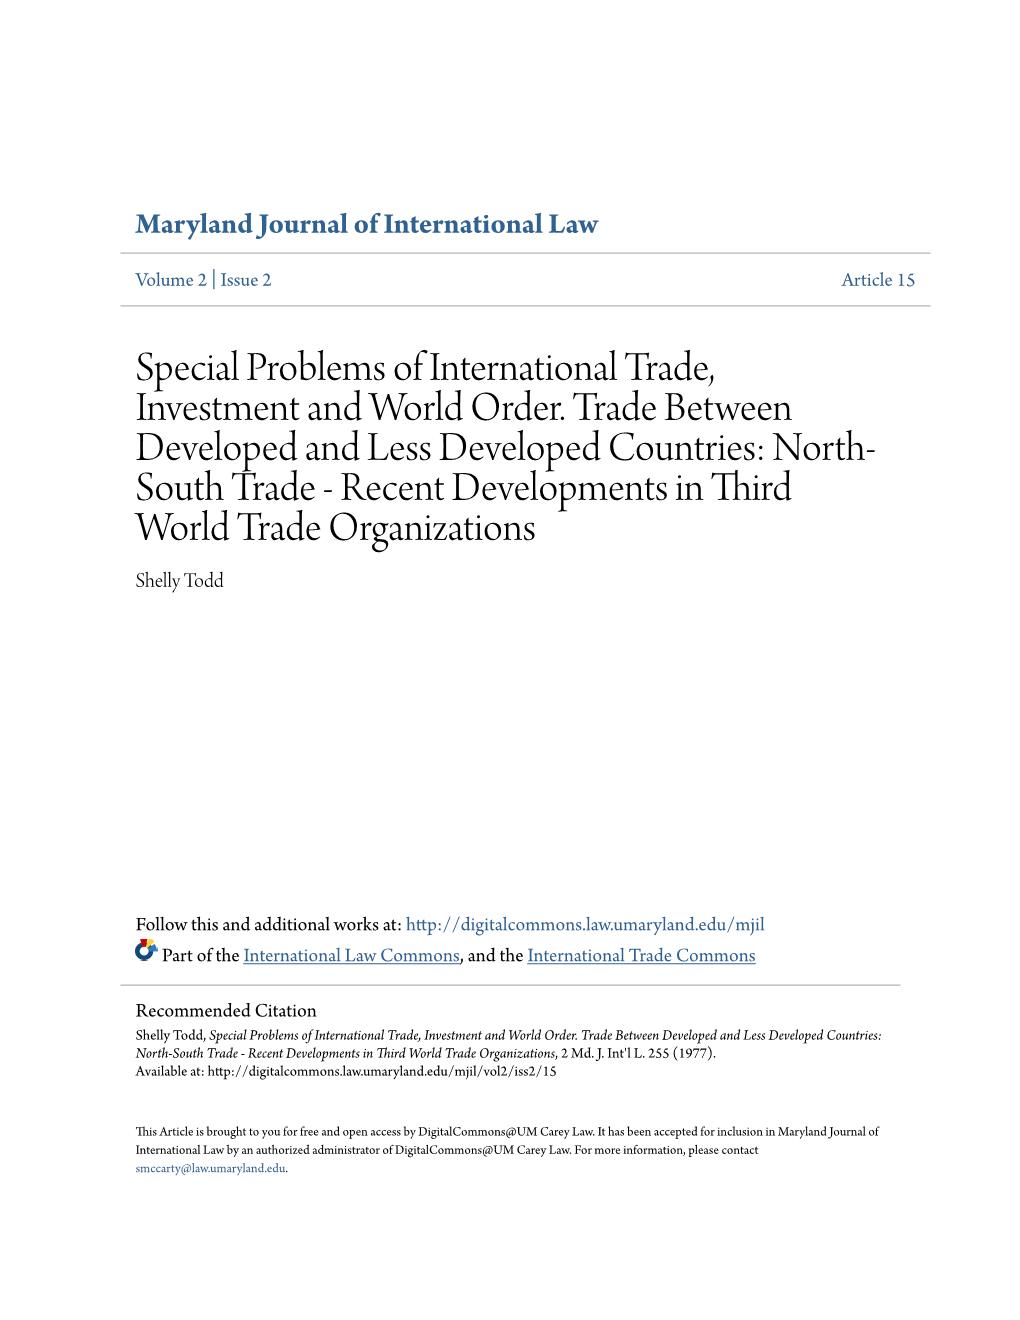 Special Problems of International Trade, Investment and World Order